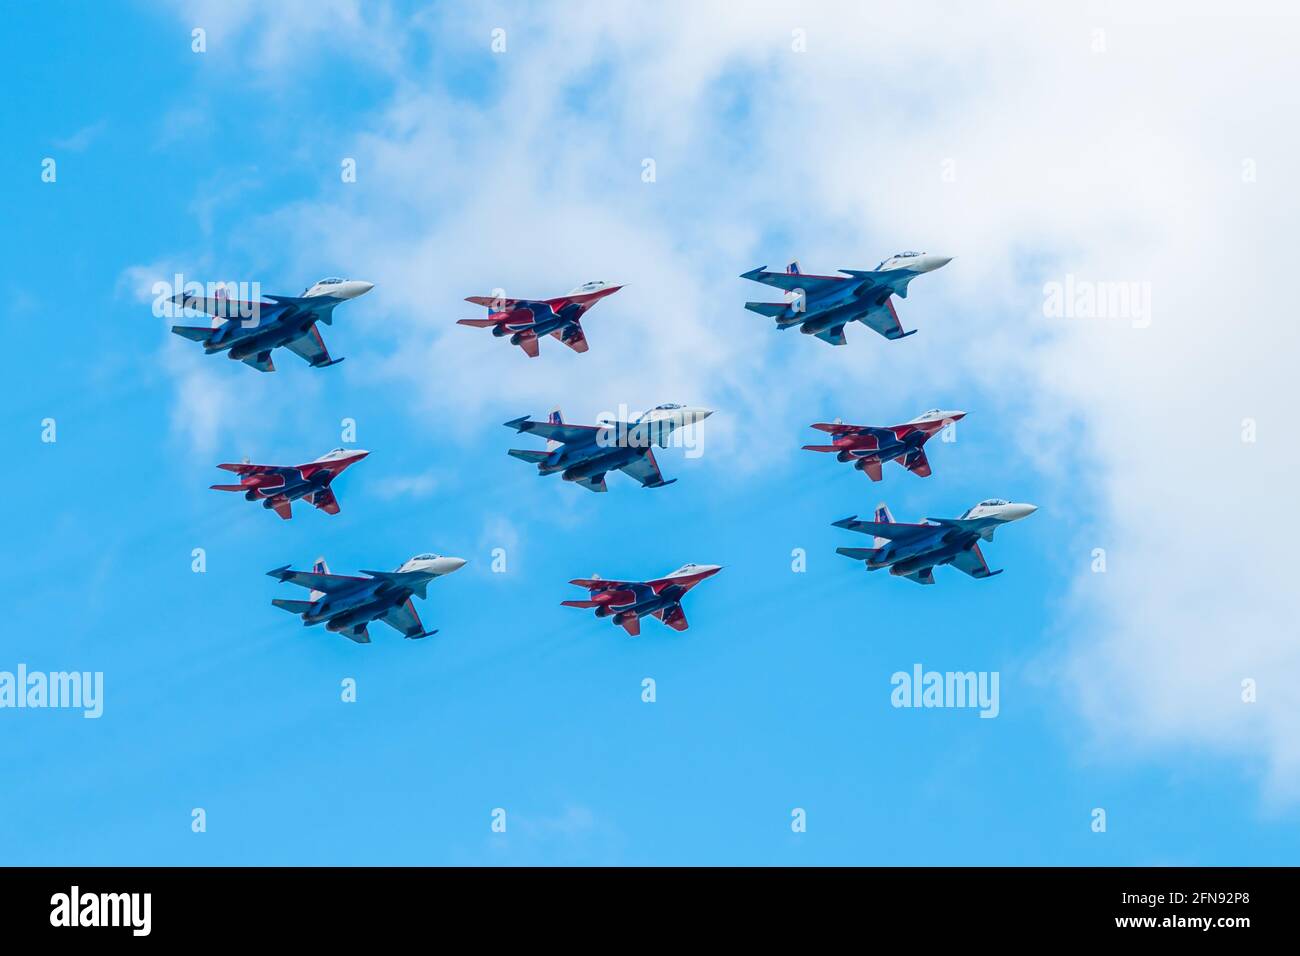 May 7, 2021, Moscow, Russia. The Cuban Diamond formation consists of MiG-29 and Su-30SM fighters of the Russian Knights and Strizhi aerobatic teams ov Stock Photo